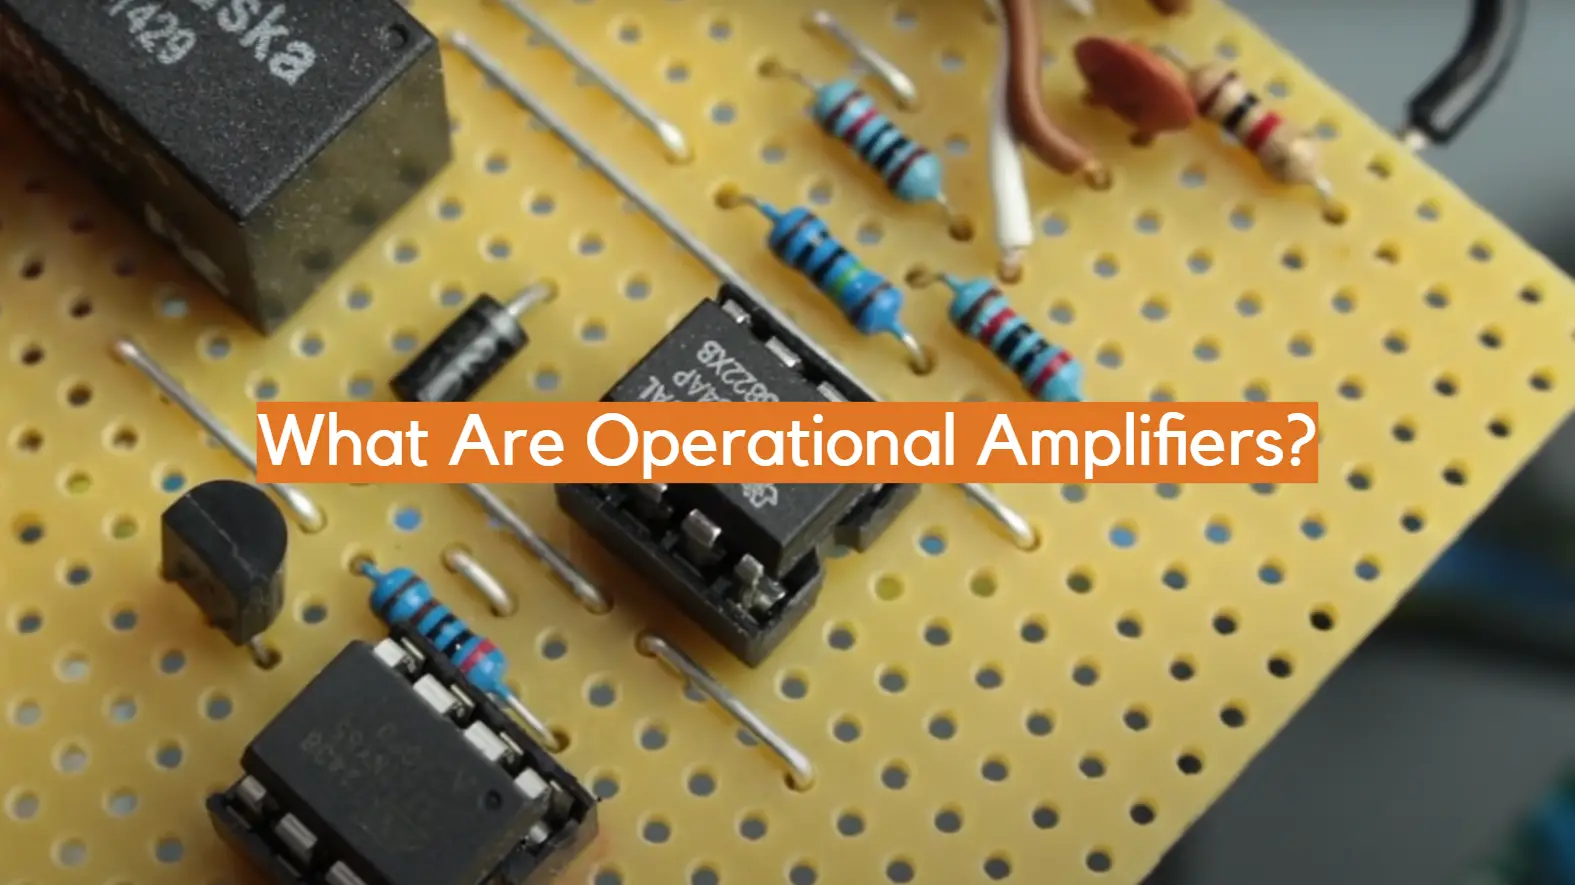 What Are Operational Amplifiers?